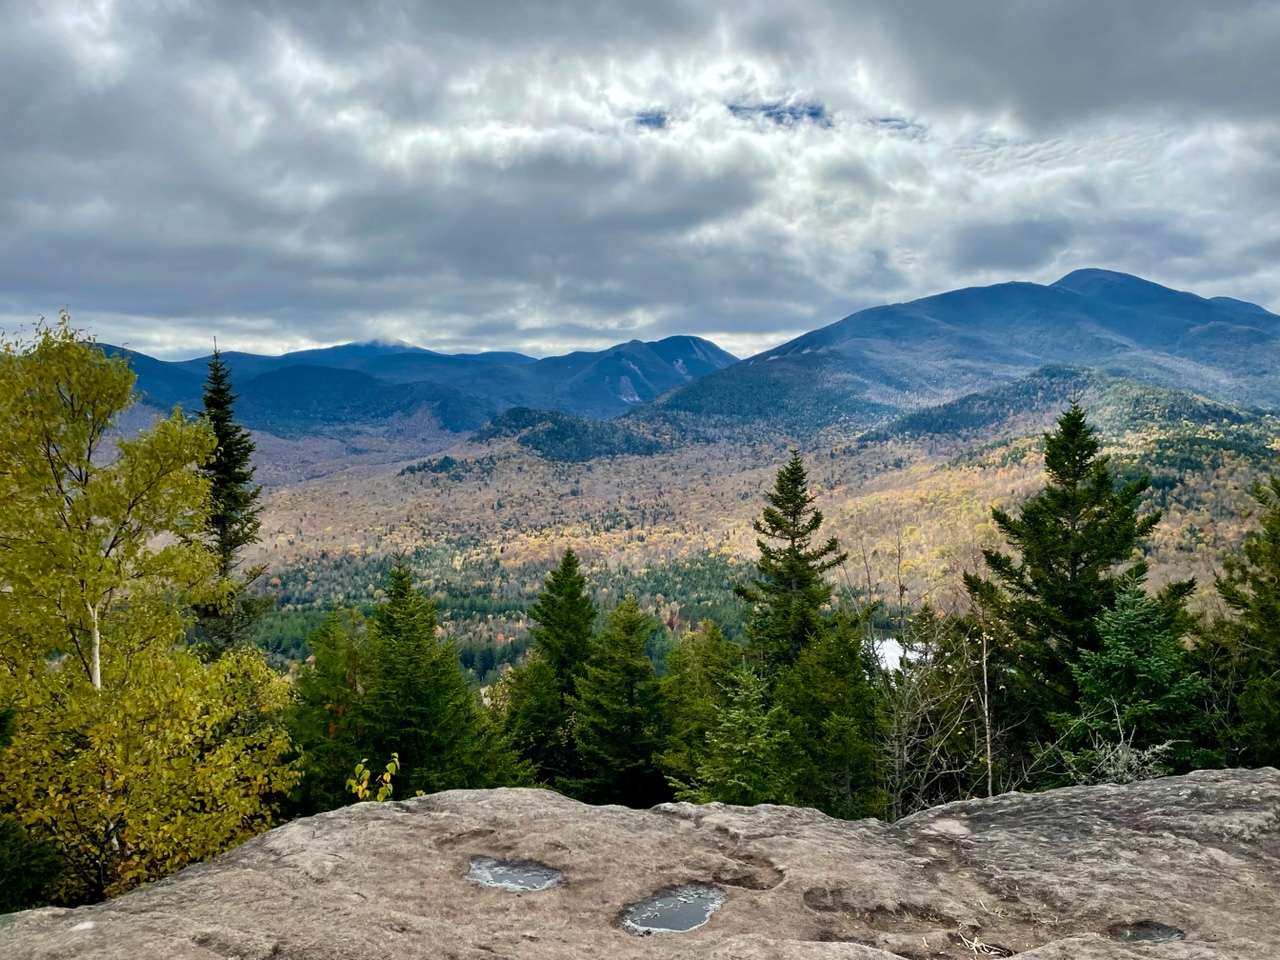 Mount Jo offers views of the High Peaks Wilderness. Photo by Tim Rowland